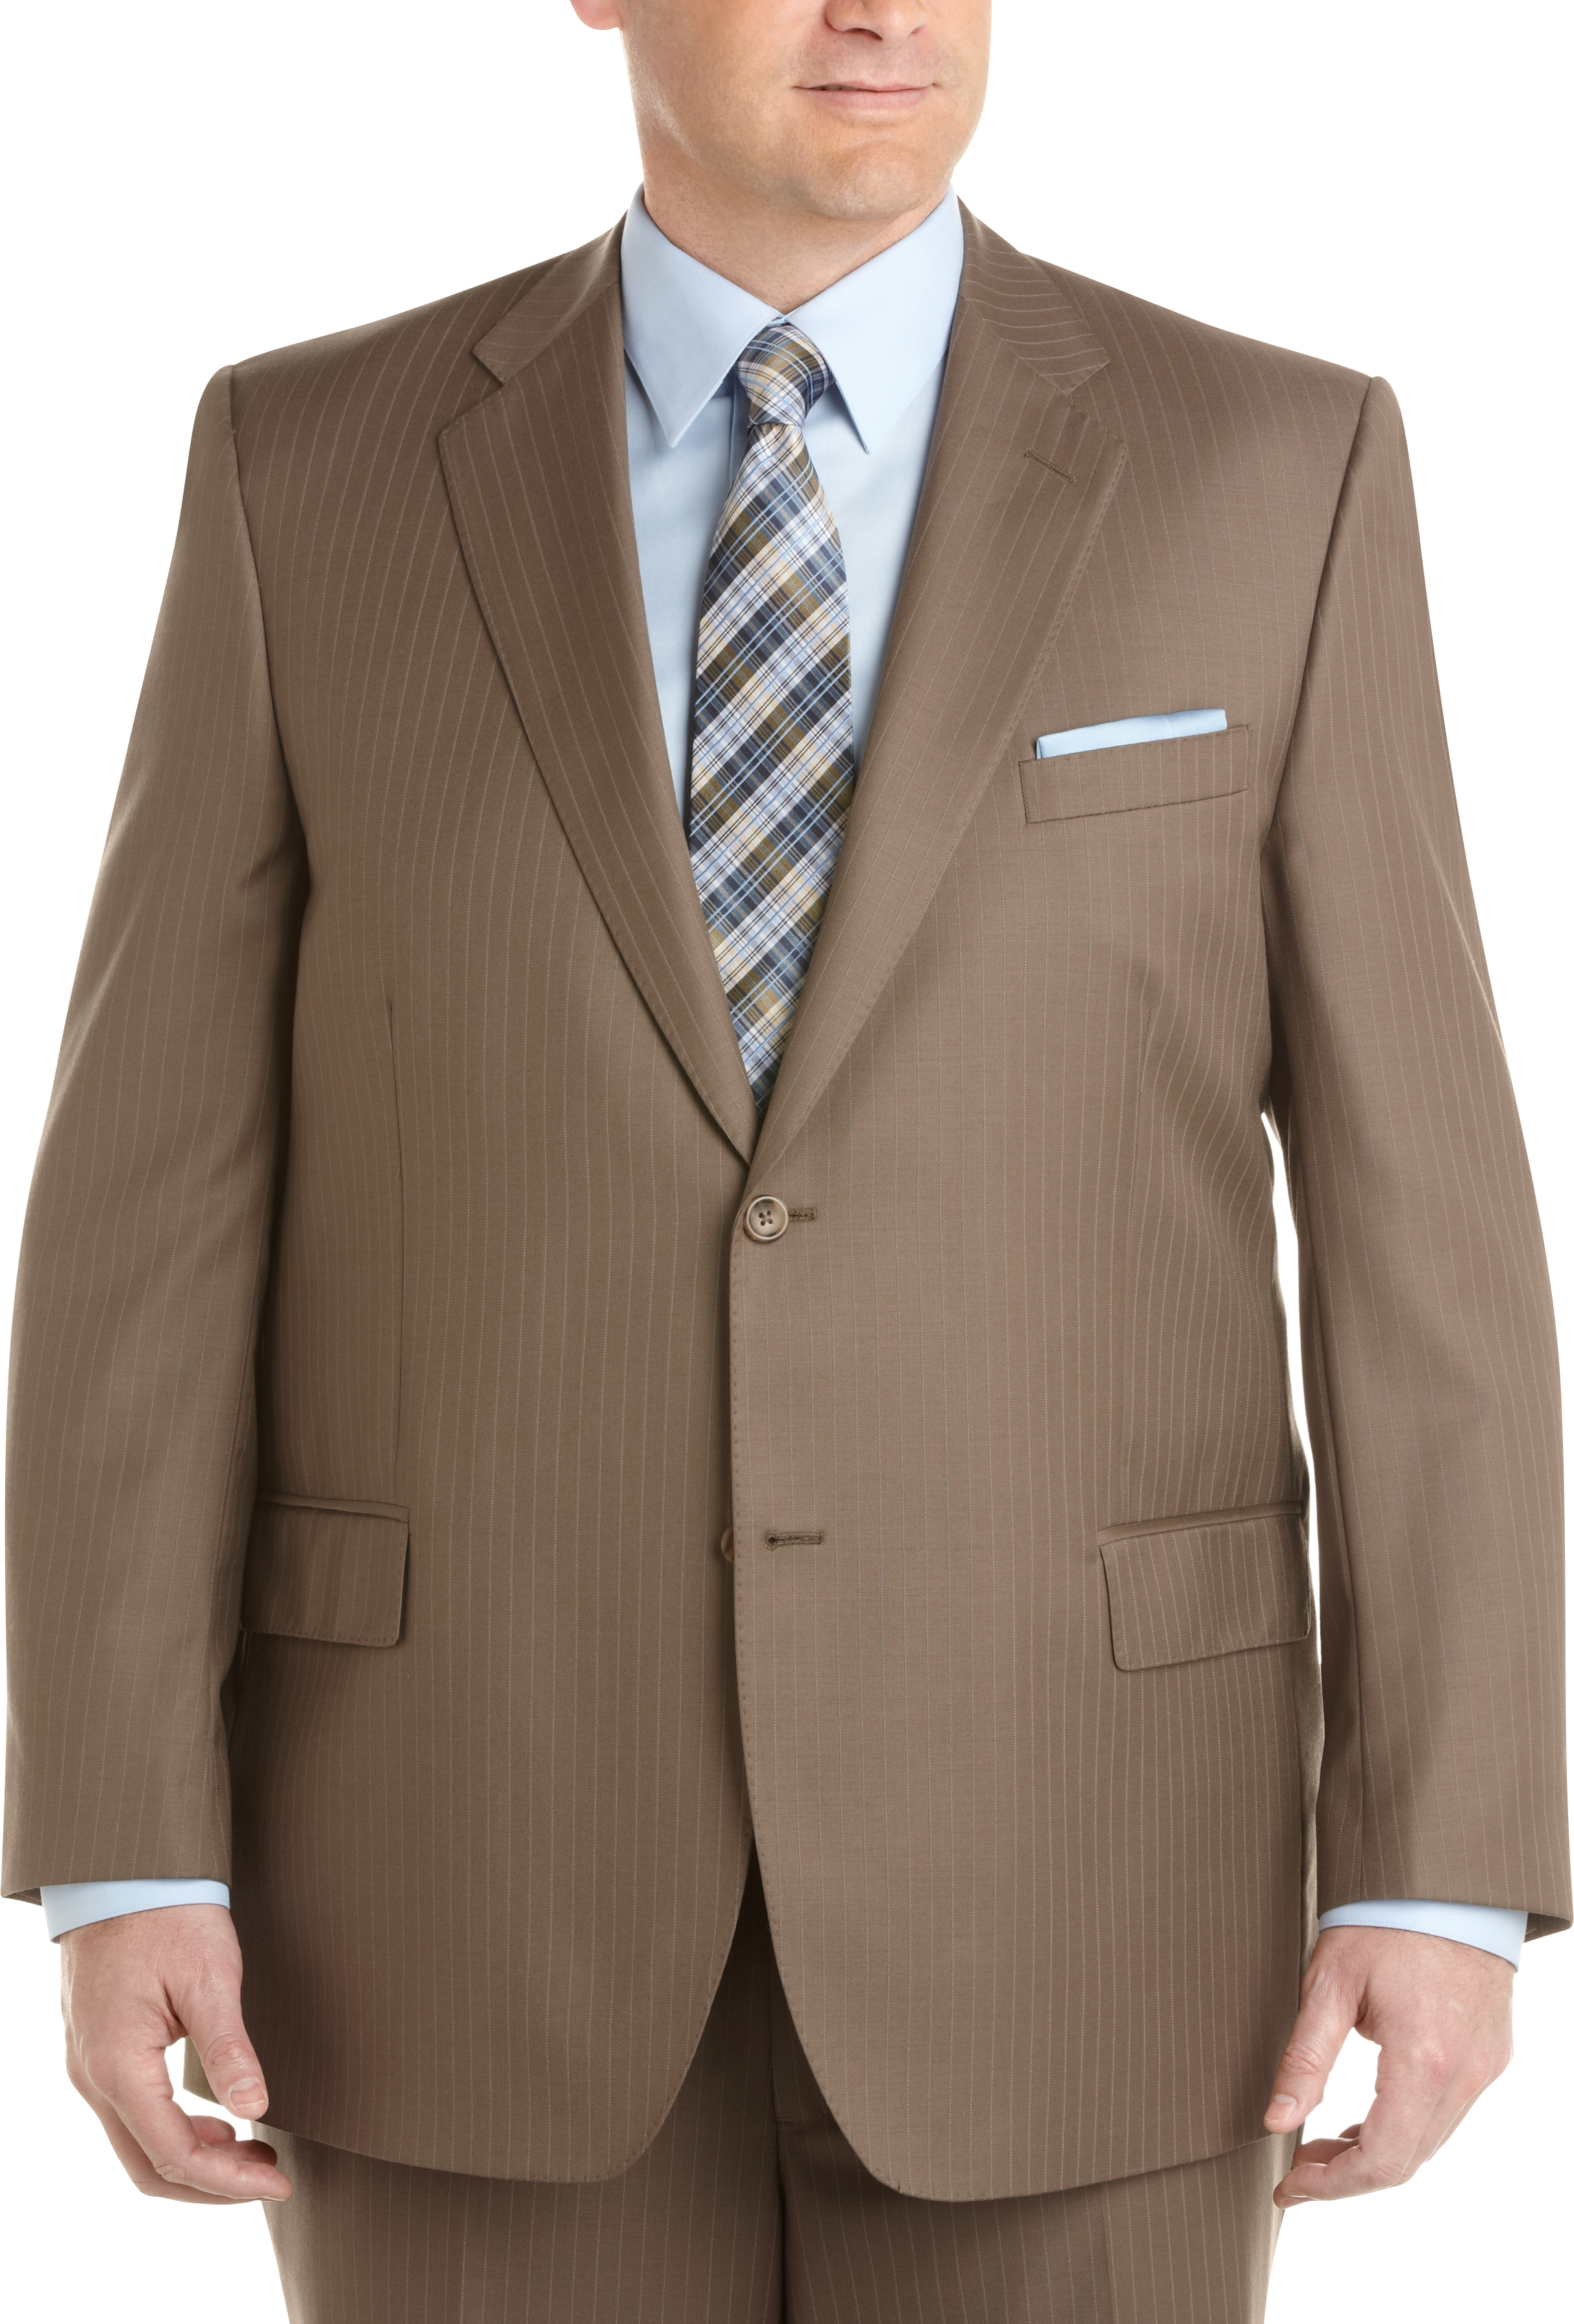 Portly - Suits | Men's Wearhouse